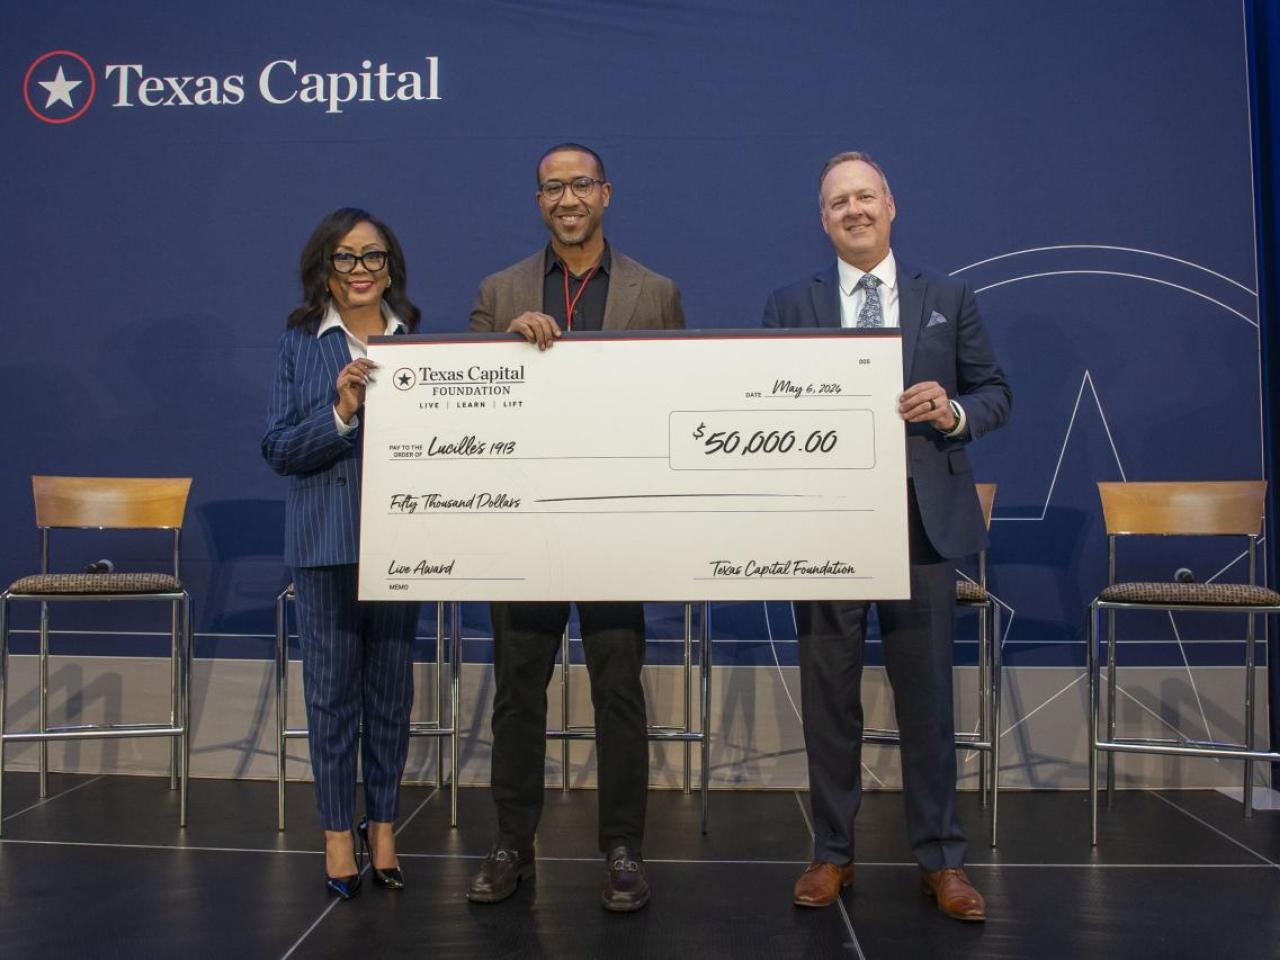 Three people holding a large check